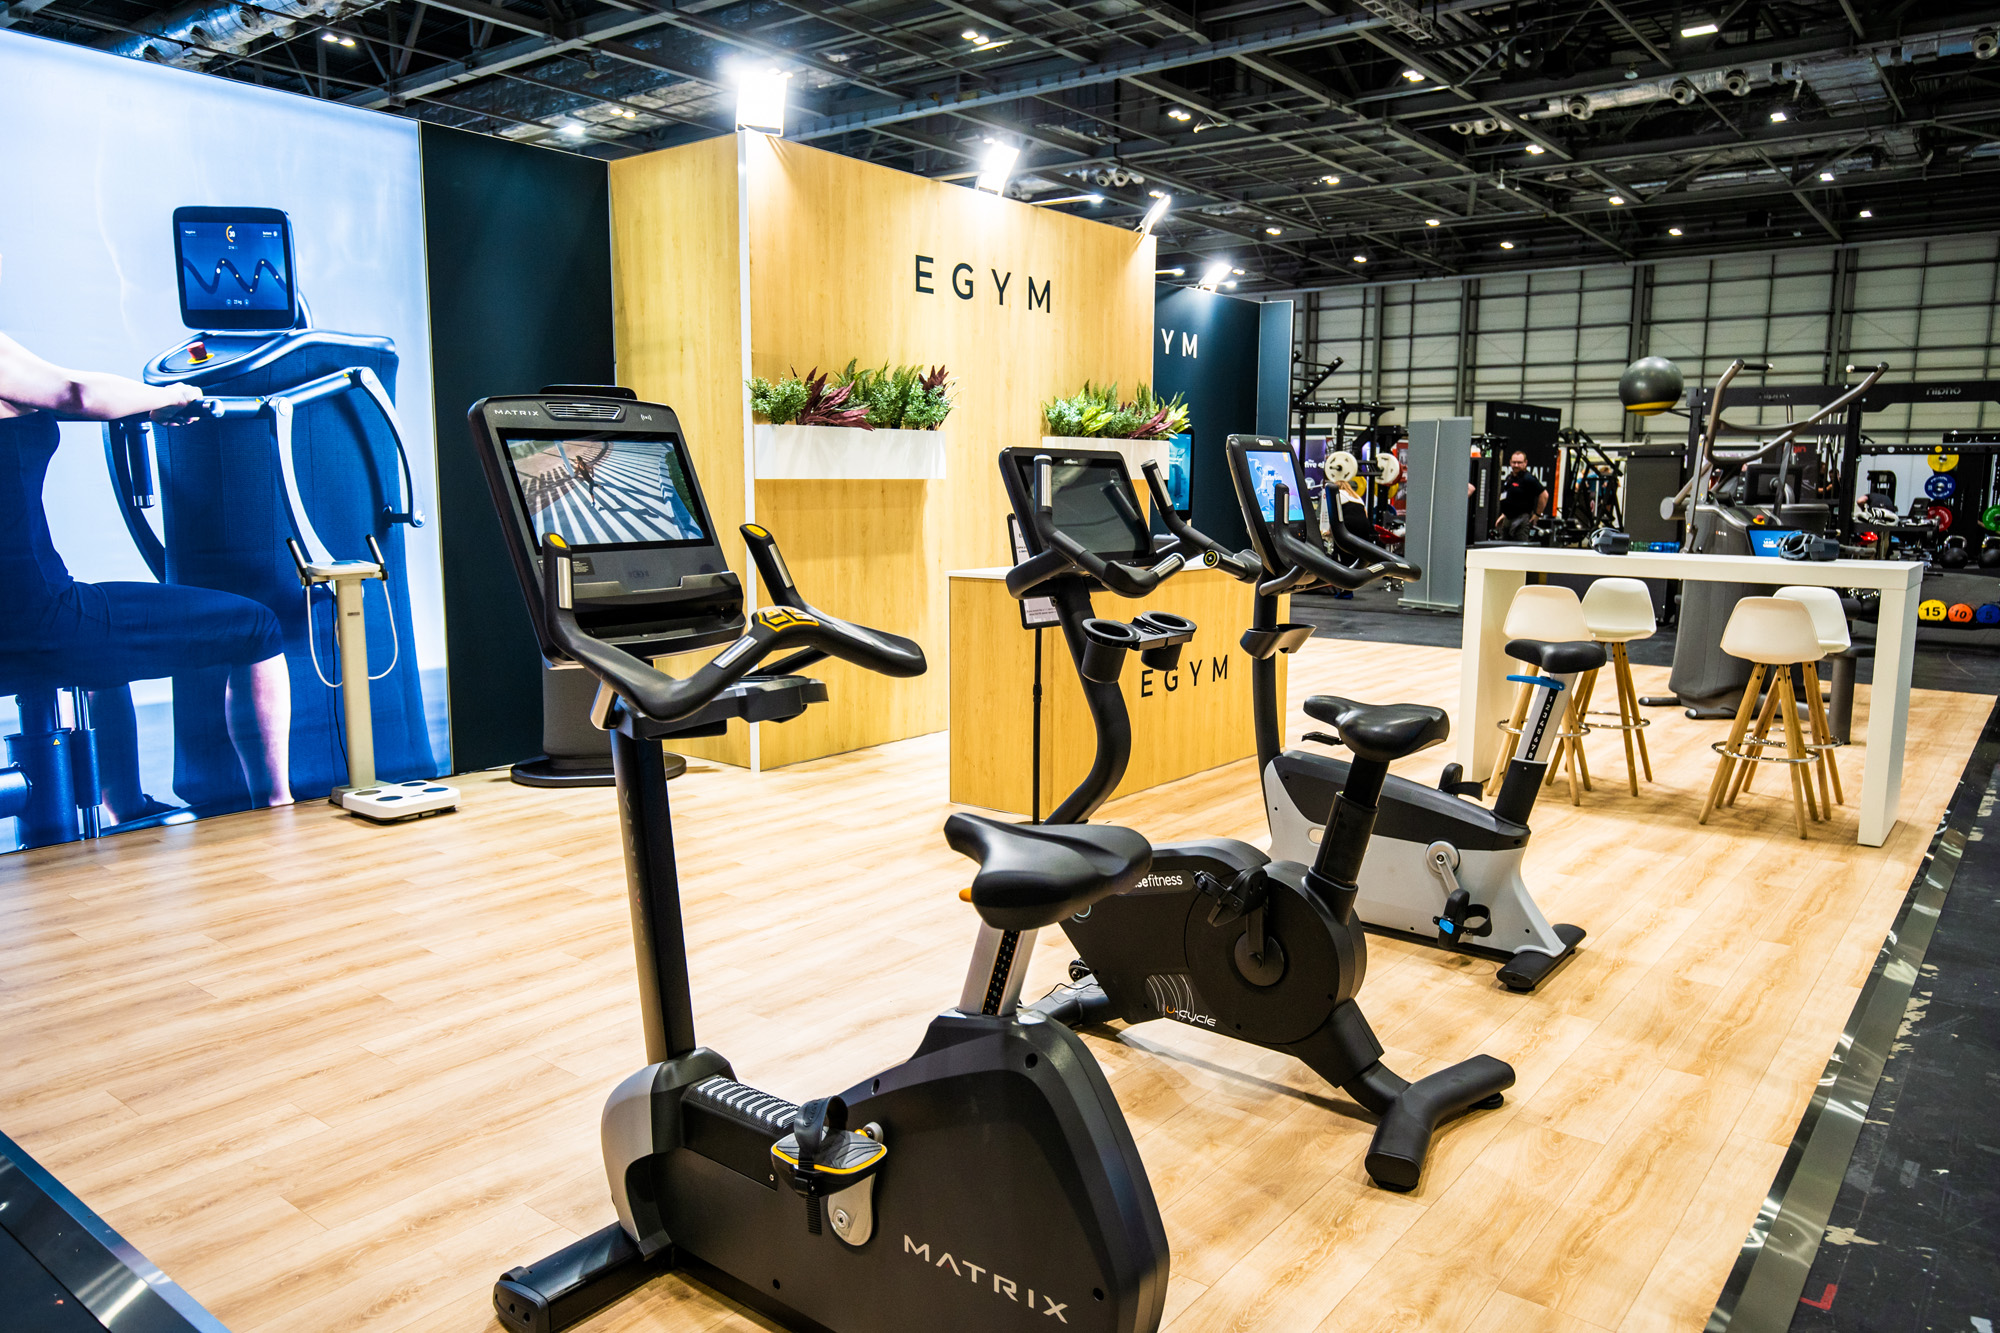 EGYM exhibition stand at Elevate. Image of their bikes